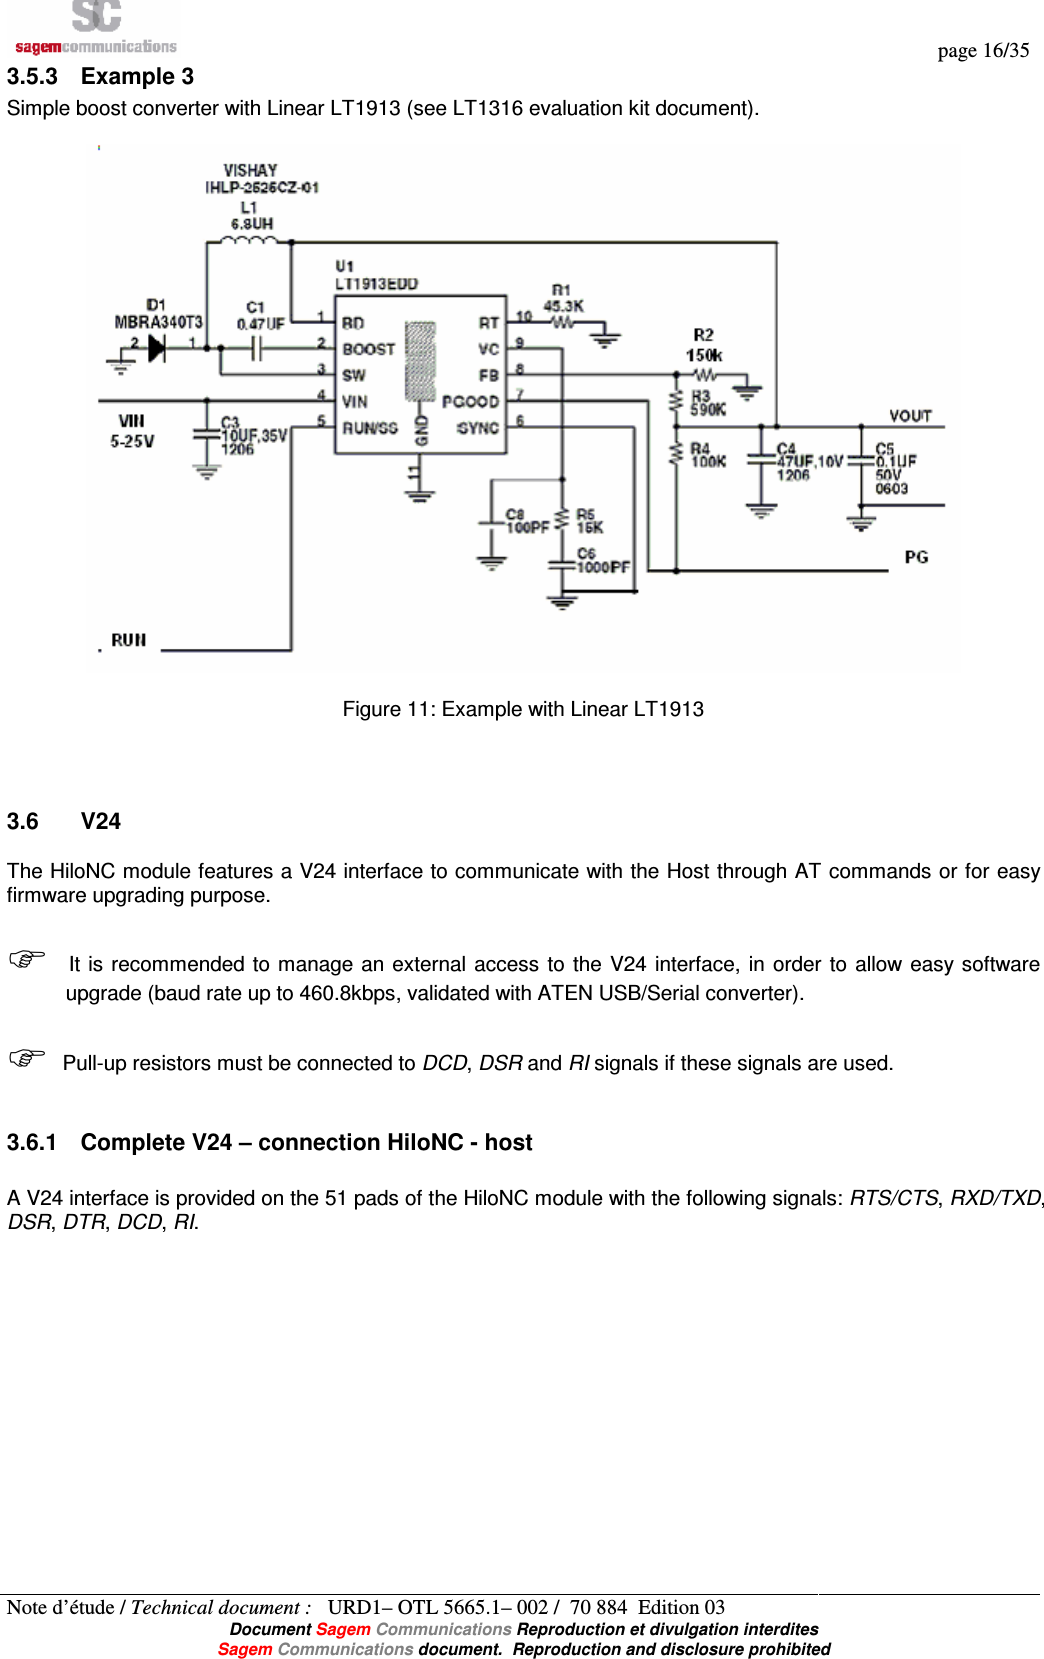   page 16/35 Note d’étude / Technical document :   URD1– OTL 5665.1– 002 /  70 884  Edition 03  Document Sagem Communications Reproduction et divulgation interdites Sagem Communications document.  Reproduction and disclosure prohibited 3.5.3  Example 3 Simple boost converter with Linear LT1913 (see LT1316 evaluation kit document).    Figure 11: Example with Linear LT1913   3.6  V24 The HiloNC module features a V24 interface to communicate with the Host through AT commands or for easy firmware upgrading purpose.   It is  recommended to manage  an external access  to  the  V24  interface,  in  order  to  allow easy software upgrade (baud rate up to 460.8kbps, validated with ATEN USB/Serial converter).   Pull-up resistors must be connected to DCD, DSR and RI signals if these signals are used.  3.6.1  Complete V24 – connection HiloNC - host  A V24 interface is provided on the 51 pads of the HiloNC module with the following signals: RTS/CTS, RXD/TXD, DSR, DTR, DCD, RI. 